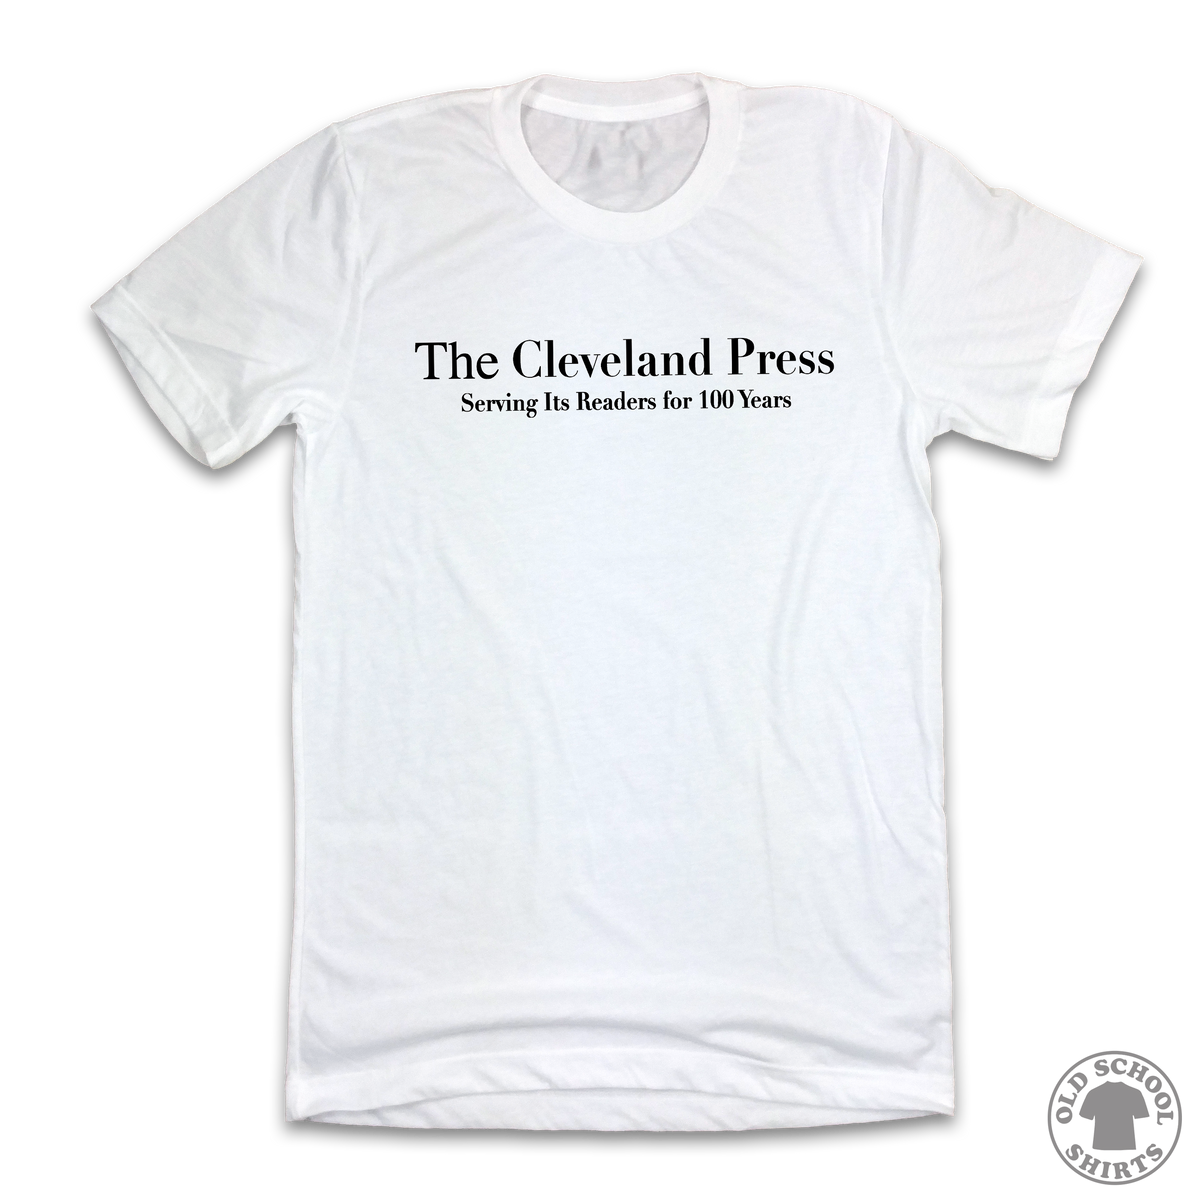 The Cleveland Press